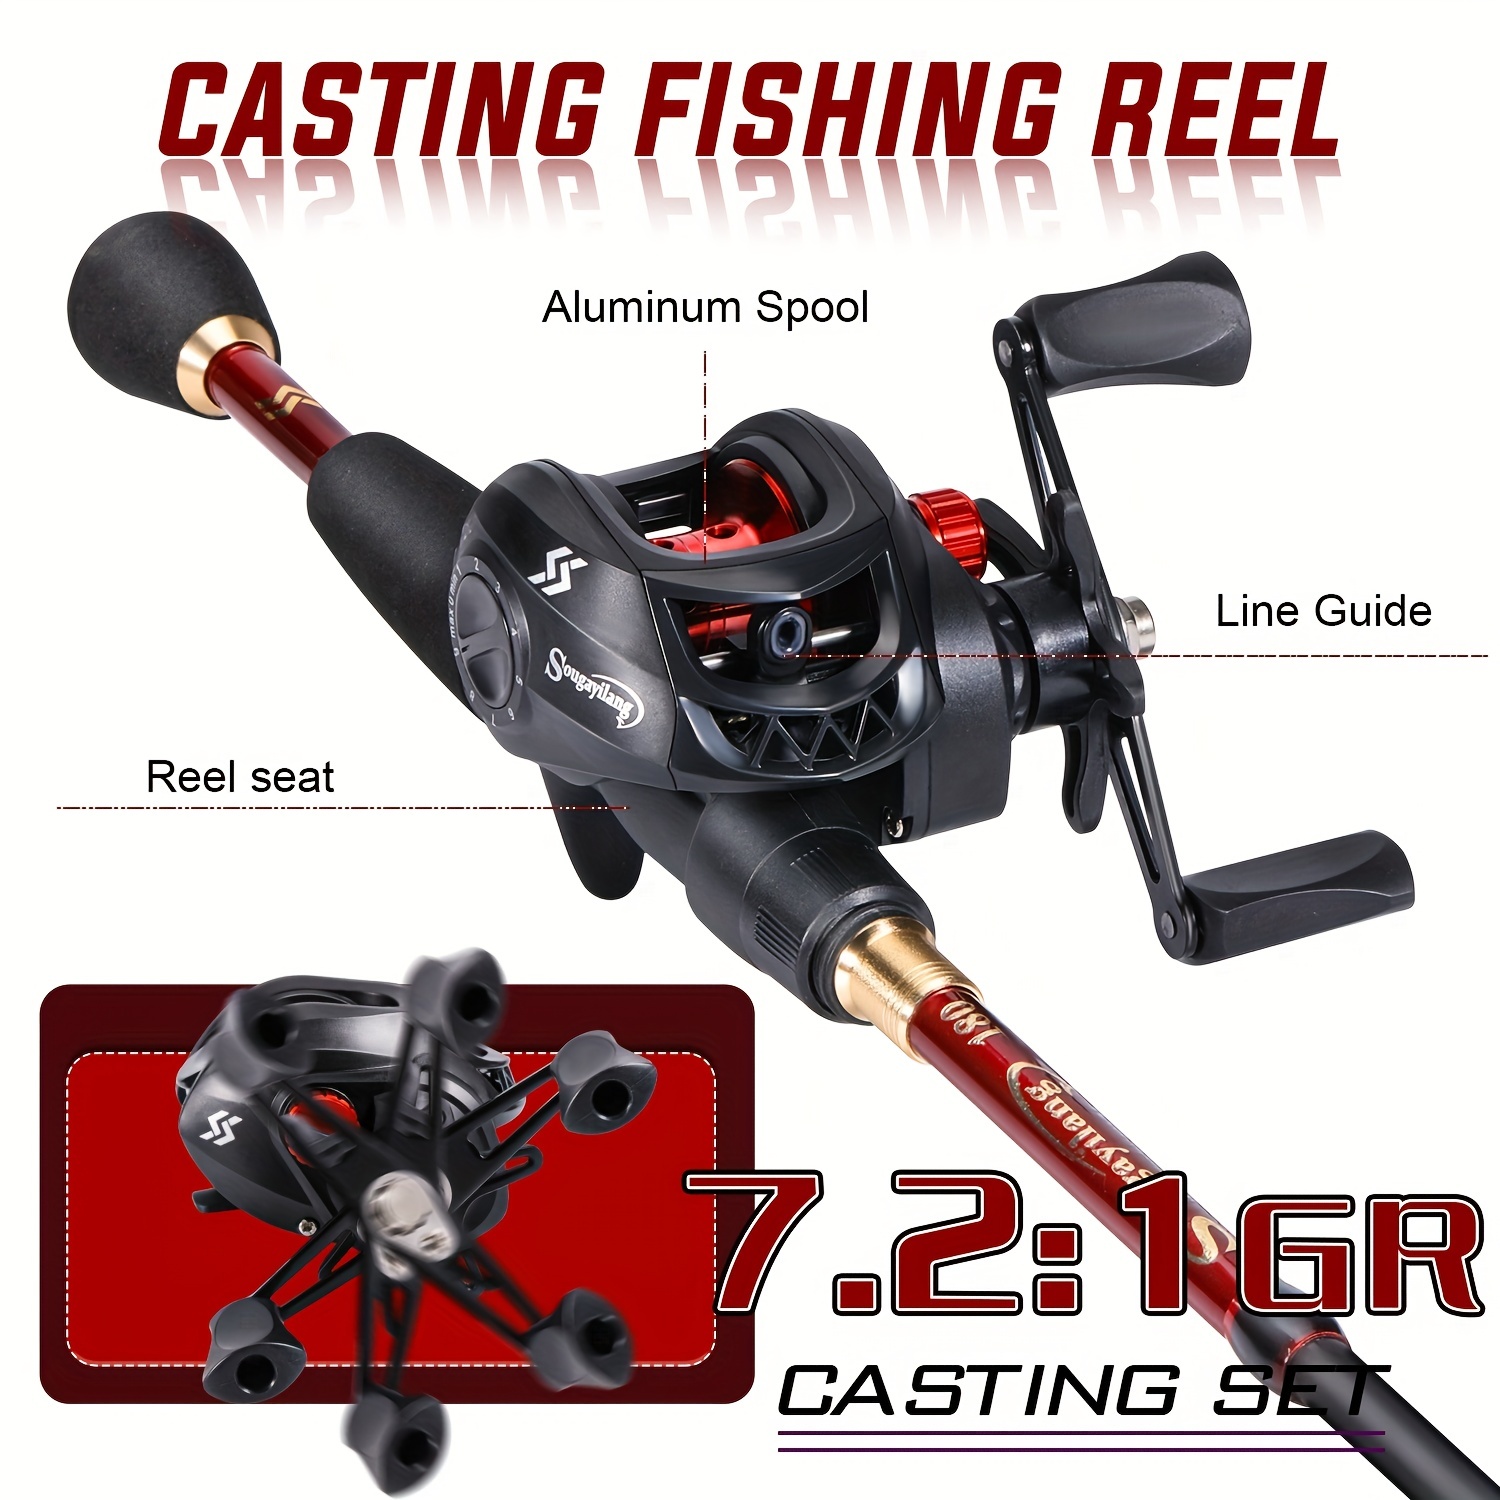 Sougayilang 4 Section Carbon Fiber Casting Rod and 17+1BB 7.2:1 High Speed  Baitcasting Reel Fishing Combo Portable for Travel